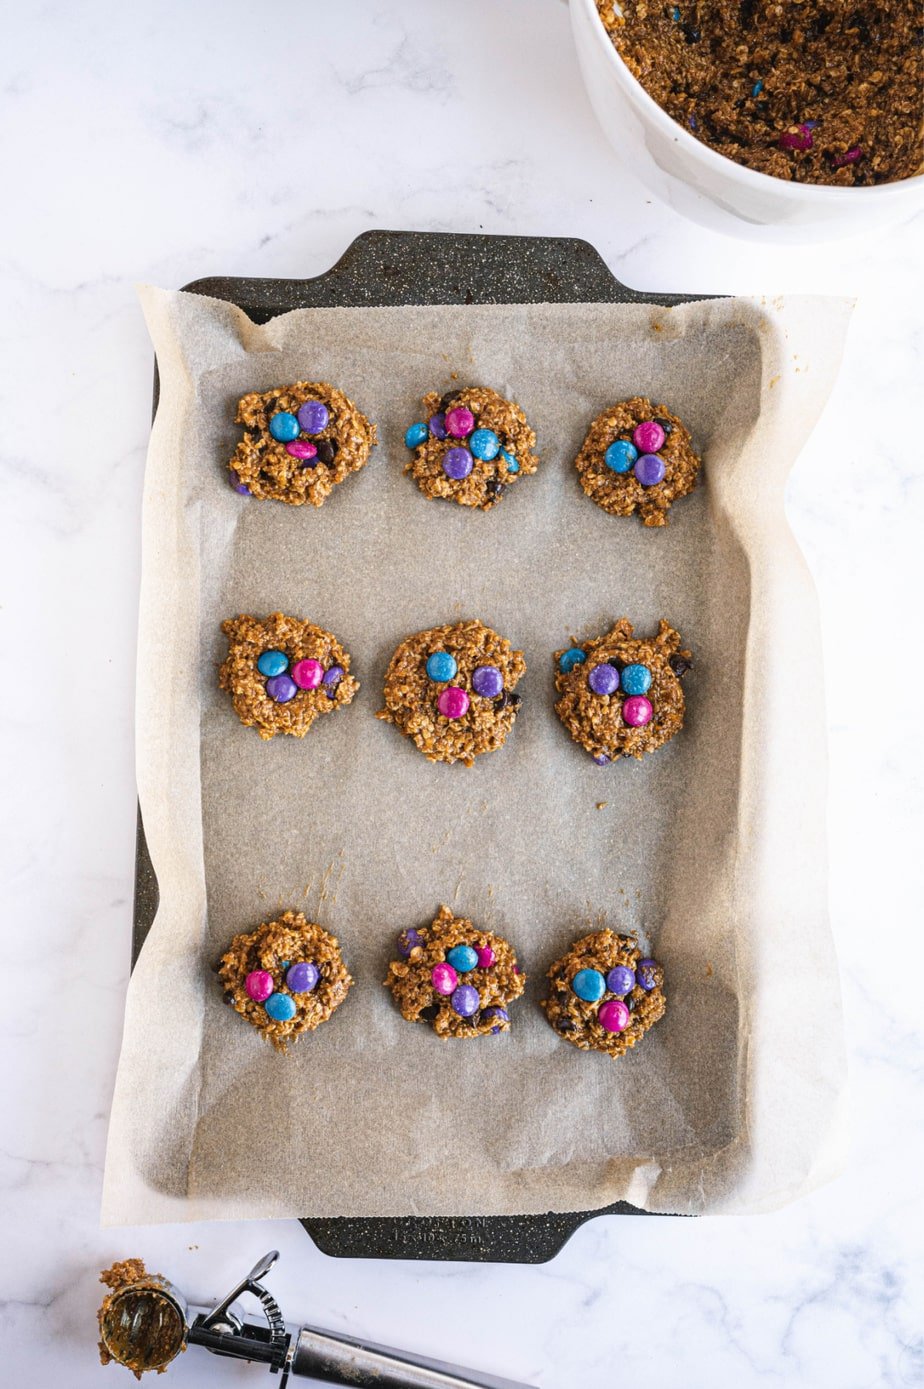 Nine cookies are on a prepared baking sheet.